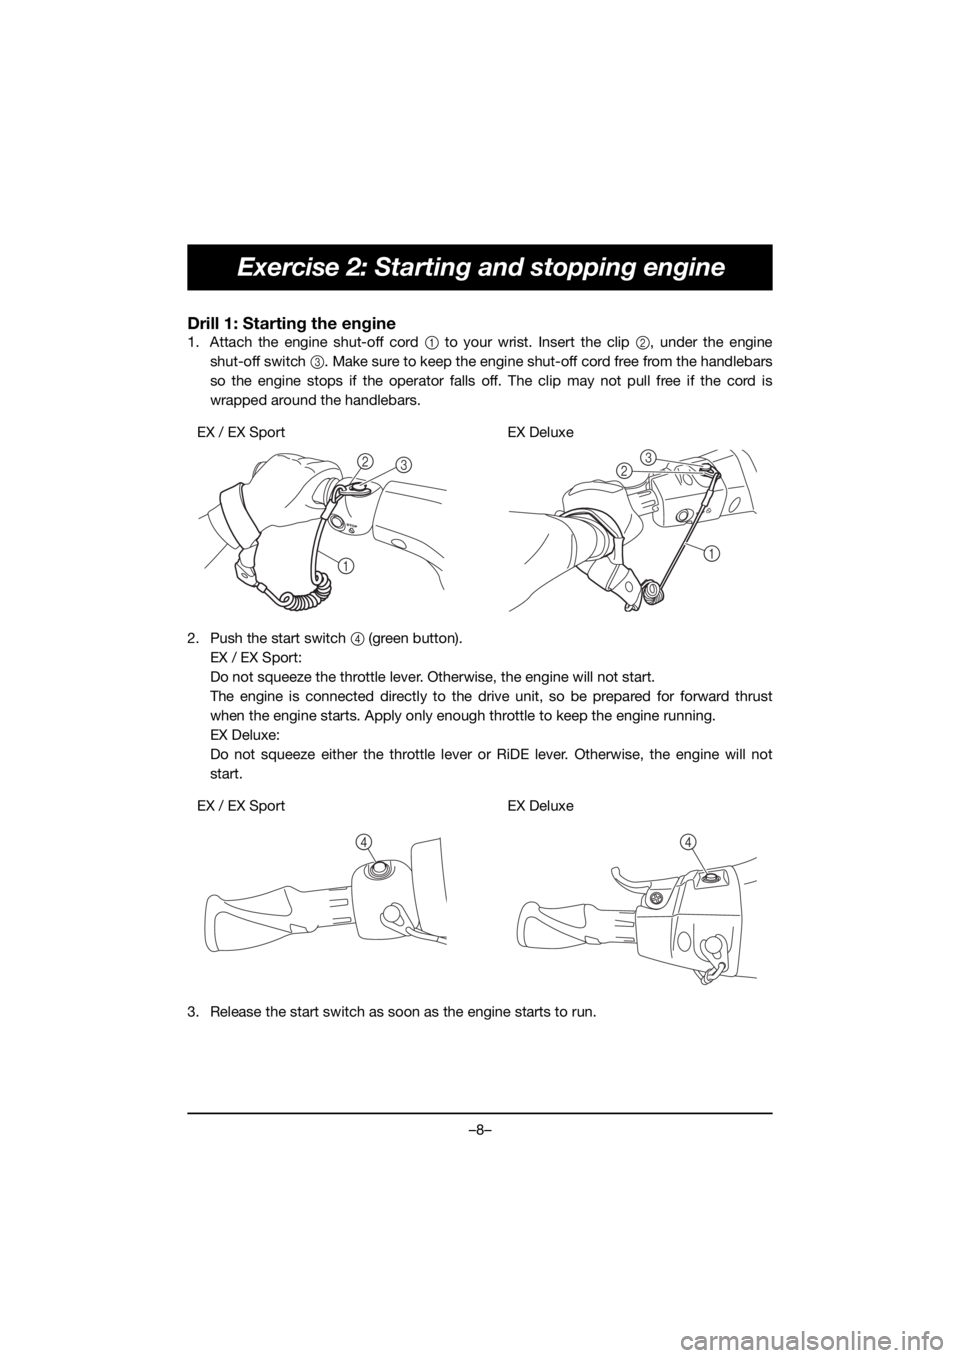 YAMAHA EX 2020  Manual de utilização (in Portuguese) –8–
Exercise 2: Starting and stopping engine
Drill 1: Starting the engine
1. Attach the engine shut-off cord 1 to your wrist. Insert the clip 2, under the engine
shut-off switch 3. Make sure to ke